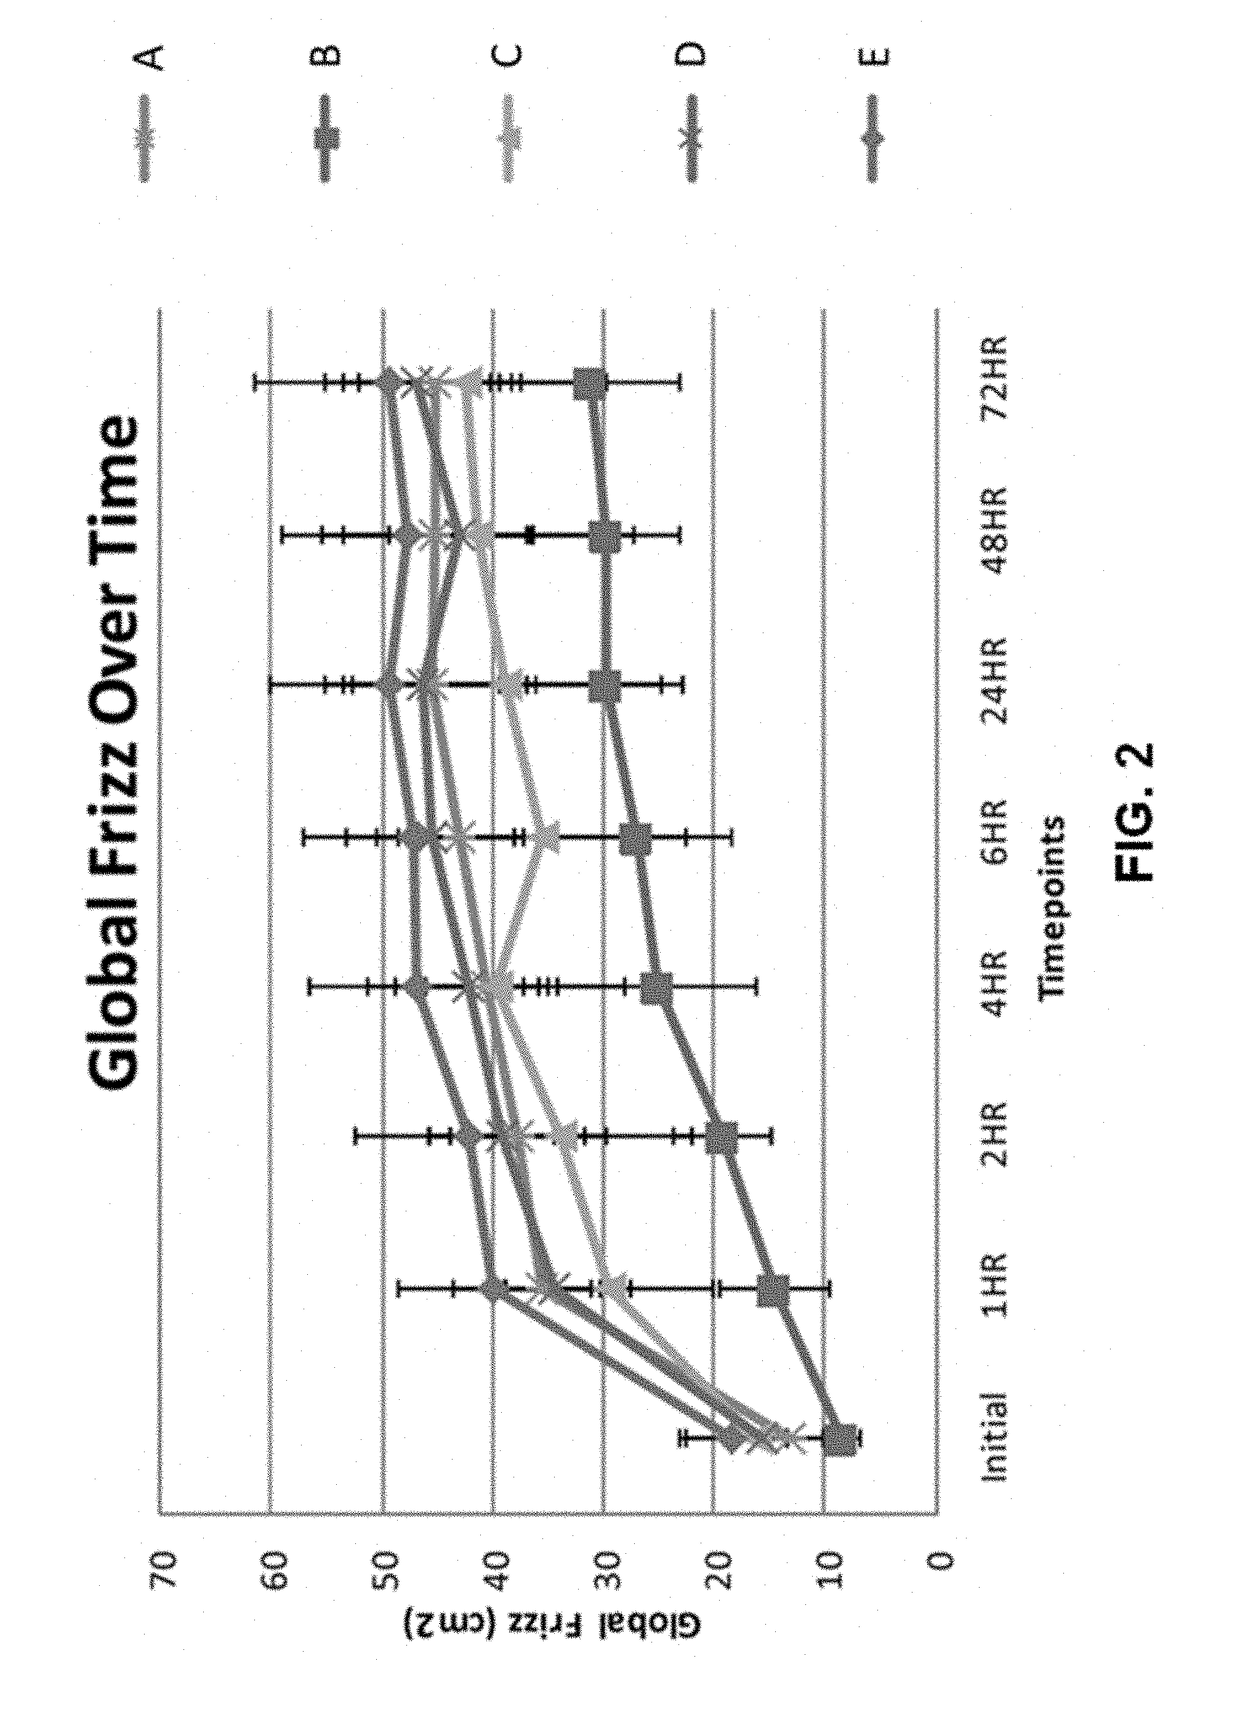 Hair-treatment compositions comprising a polyurethane latex polymer and thickening agent